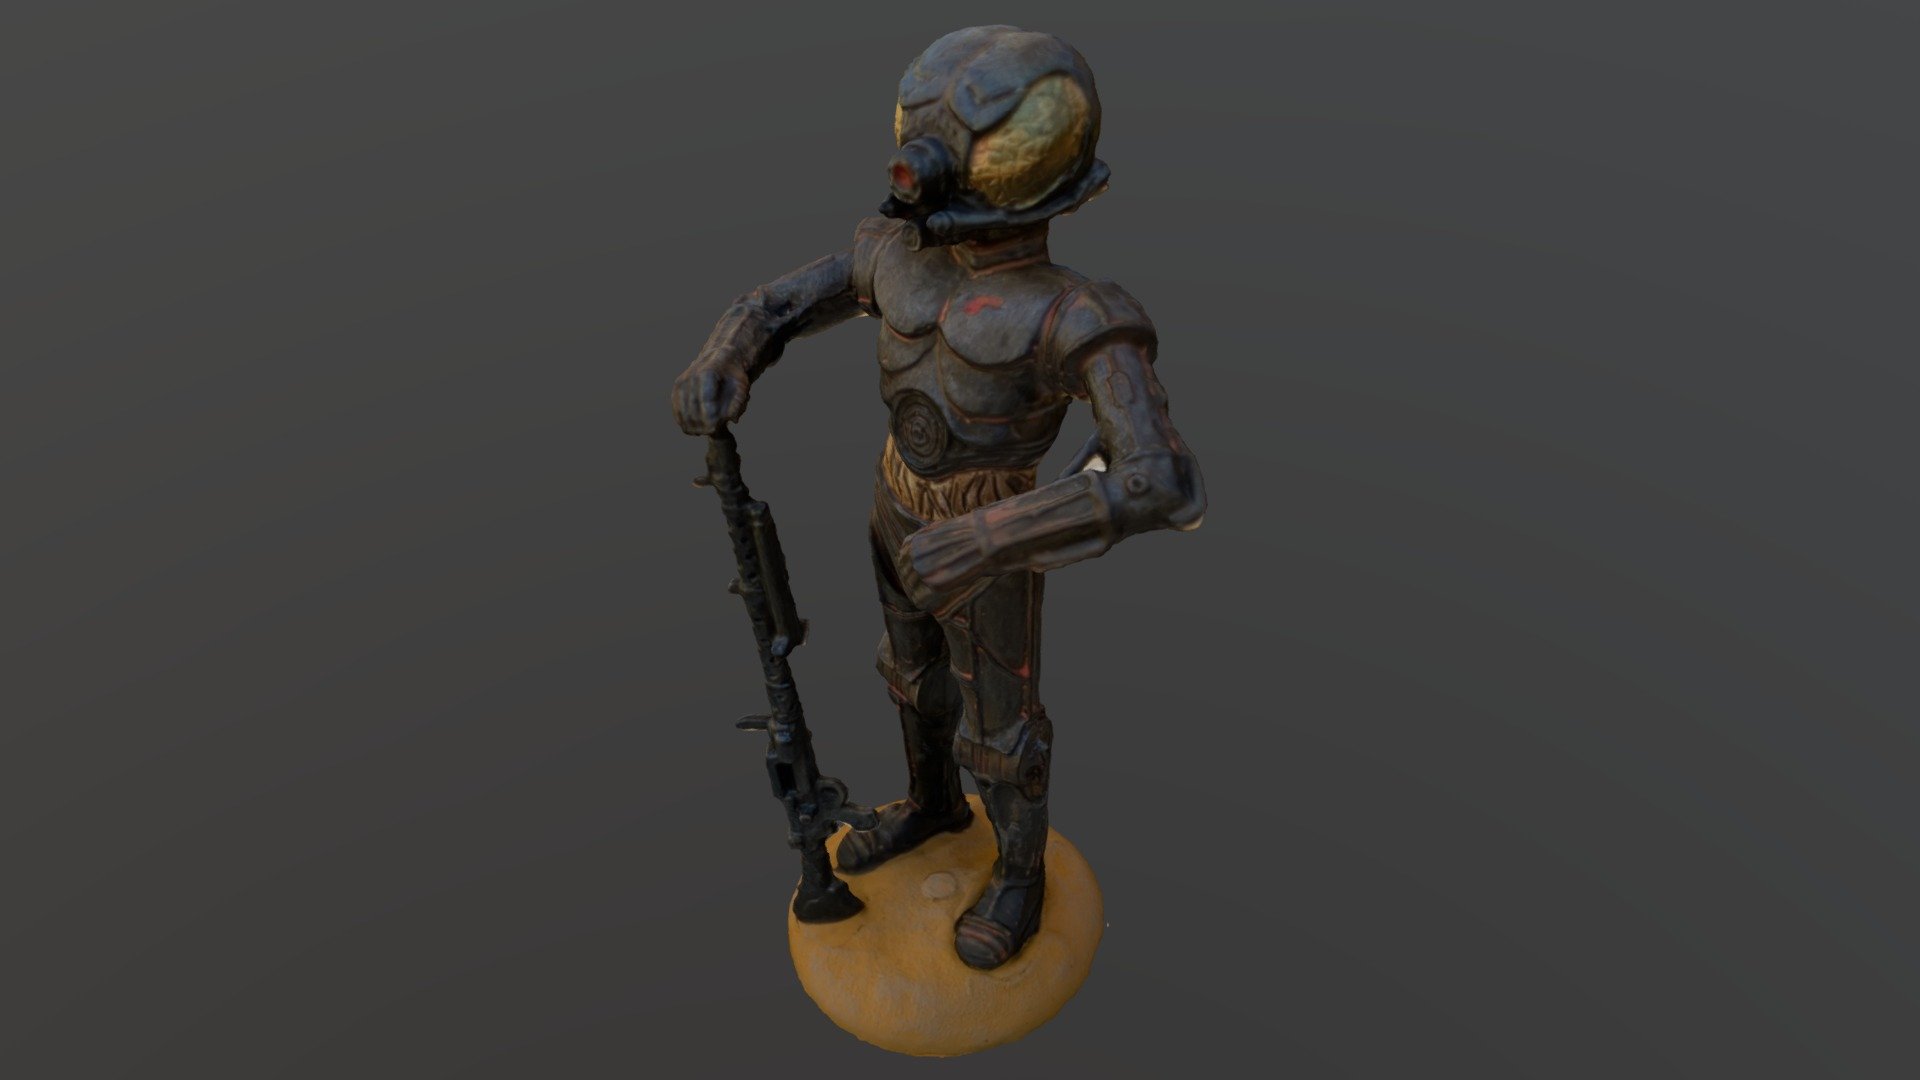 A miniature lead statue of 4-LOM, a character from the Star Wars franchise, captured with RealityScan photogrammetry software 3d model